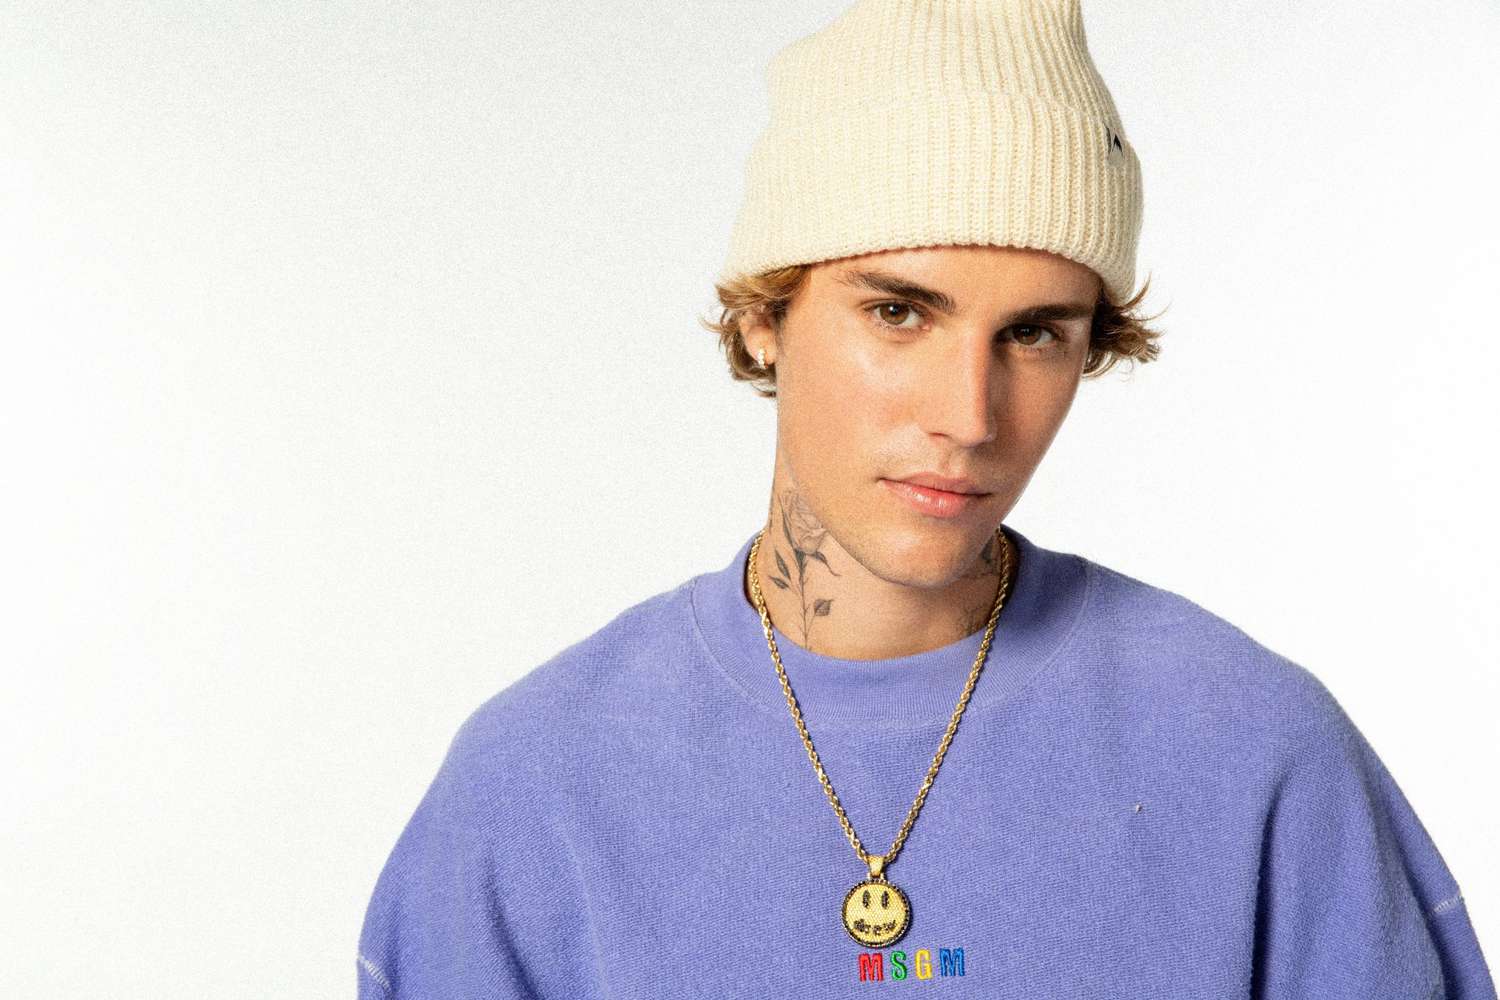 Justin Bieber’s Evolution: From Teen Sensation to Global Icon